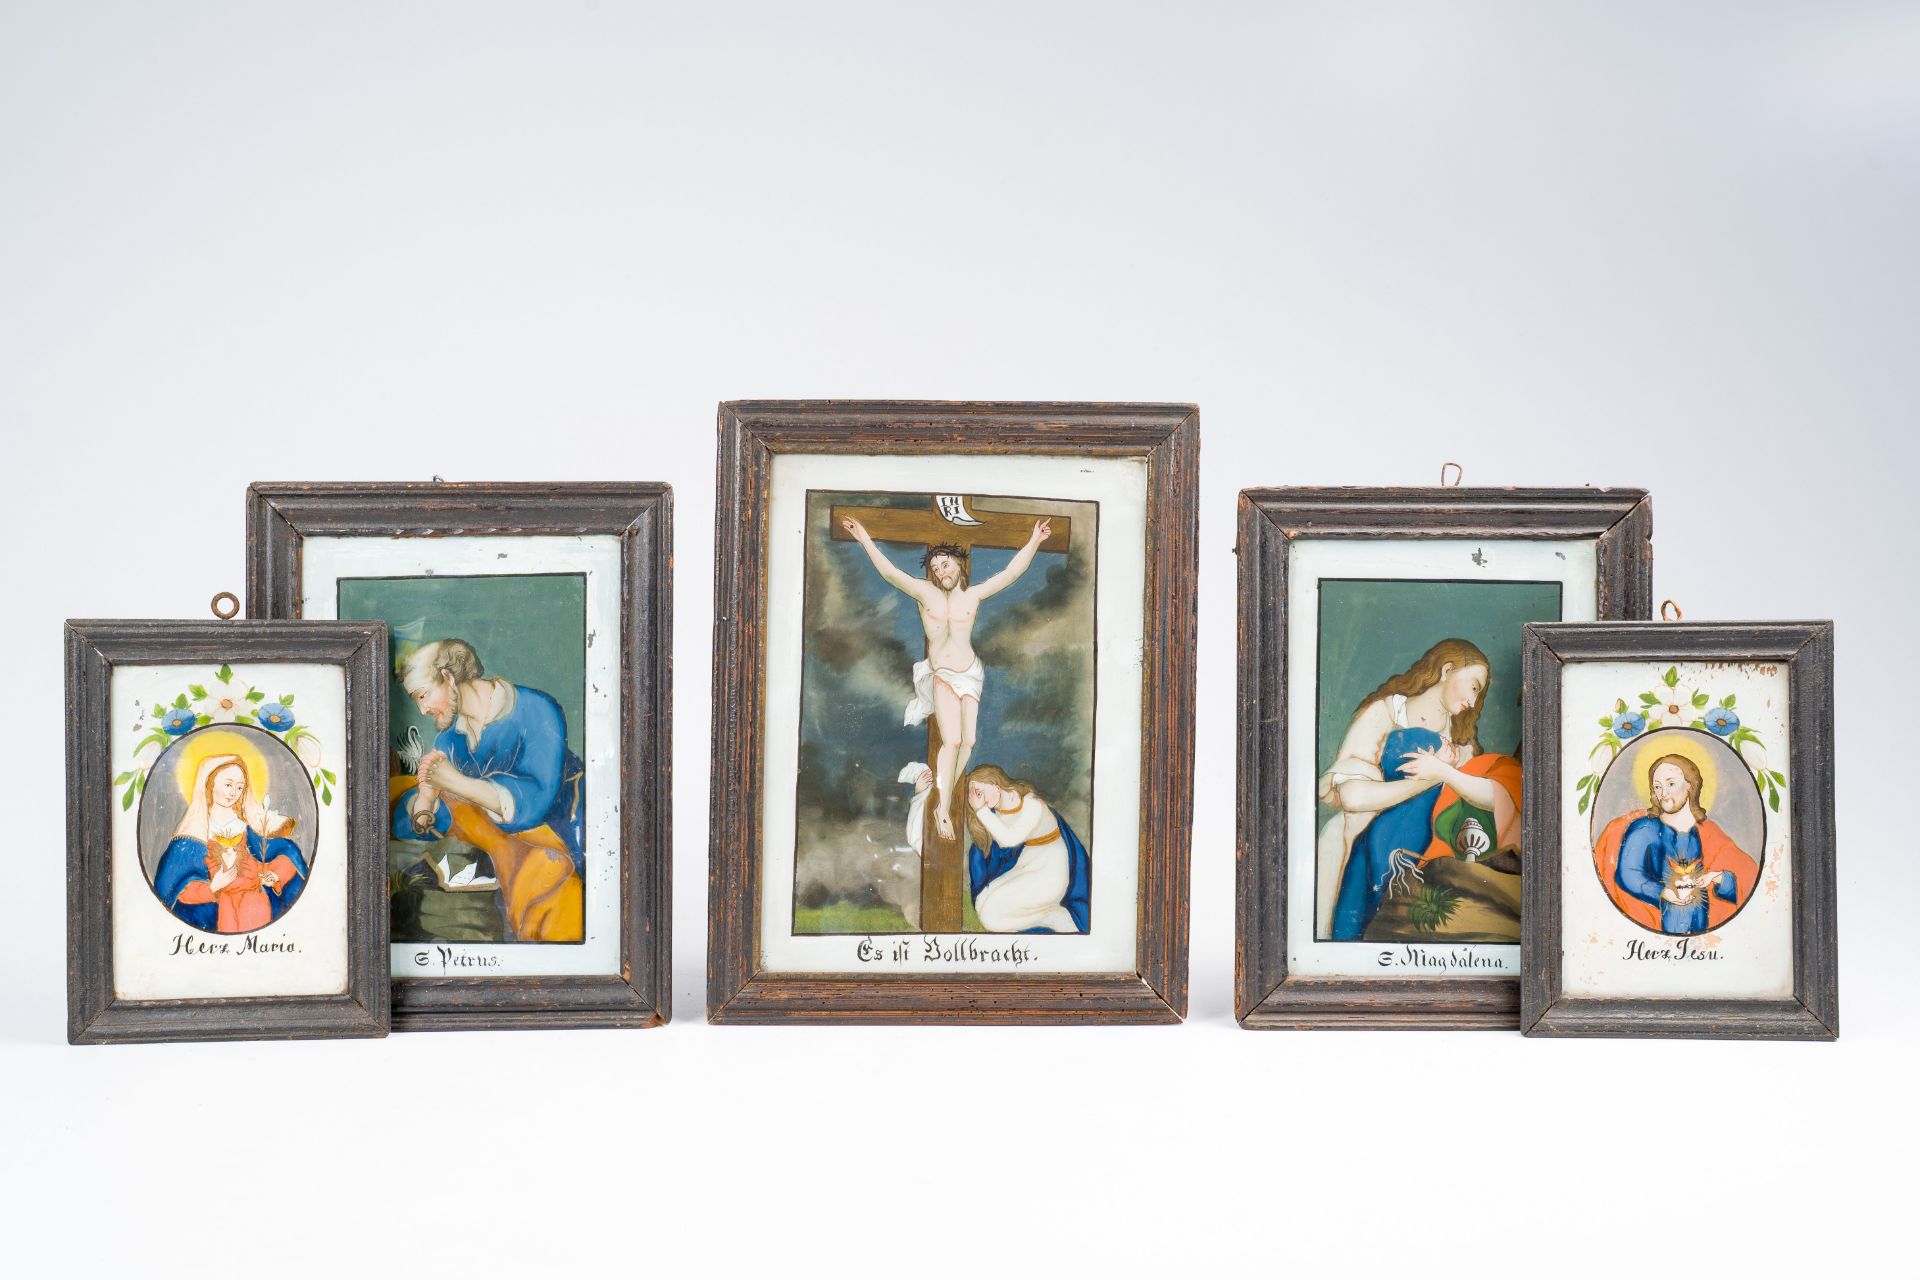 German school: Five different religious scenes, reverse glass painting, 18th/19th C.